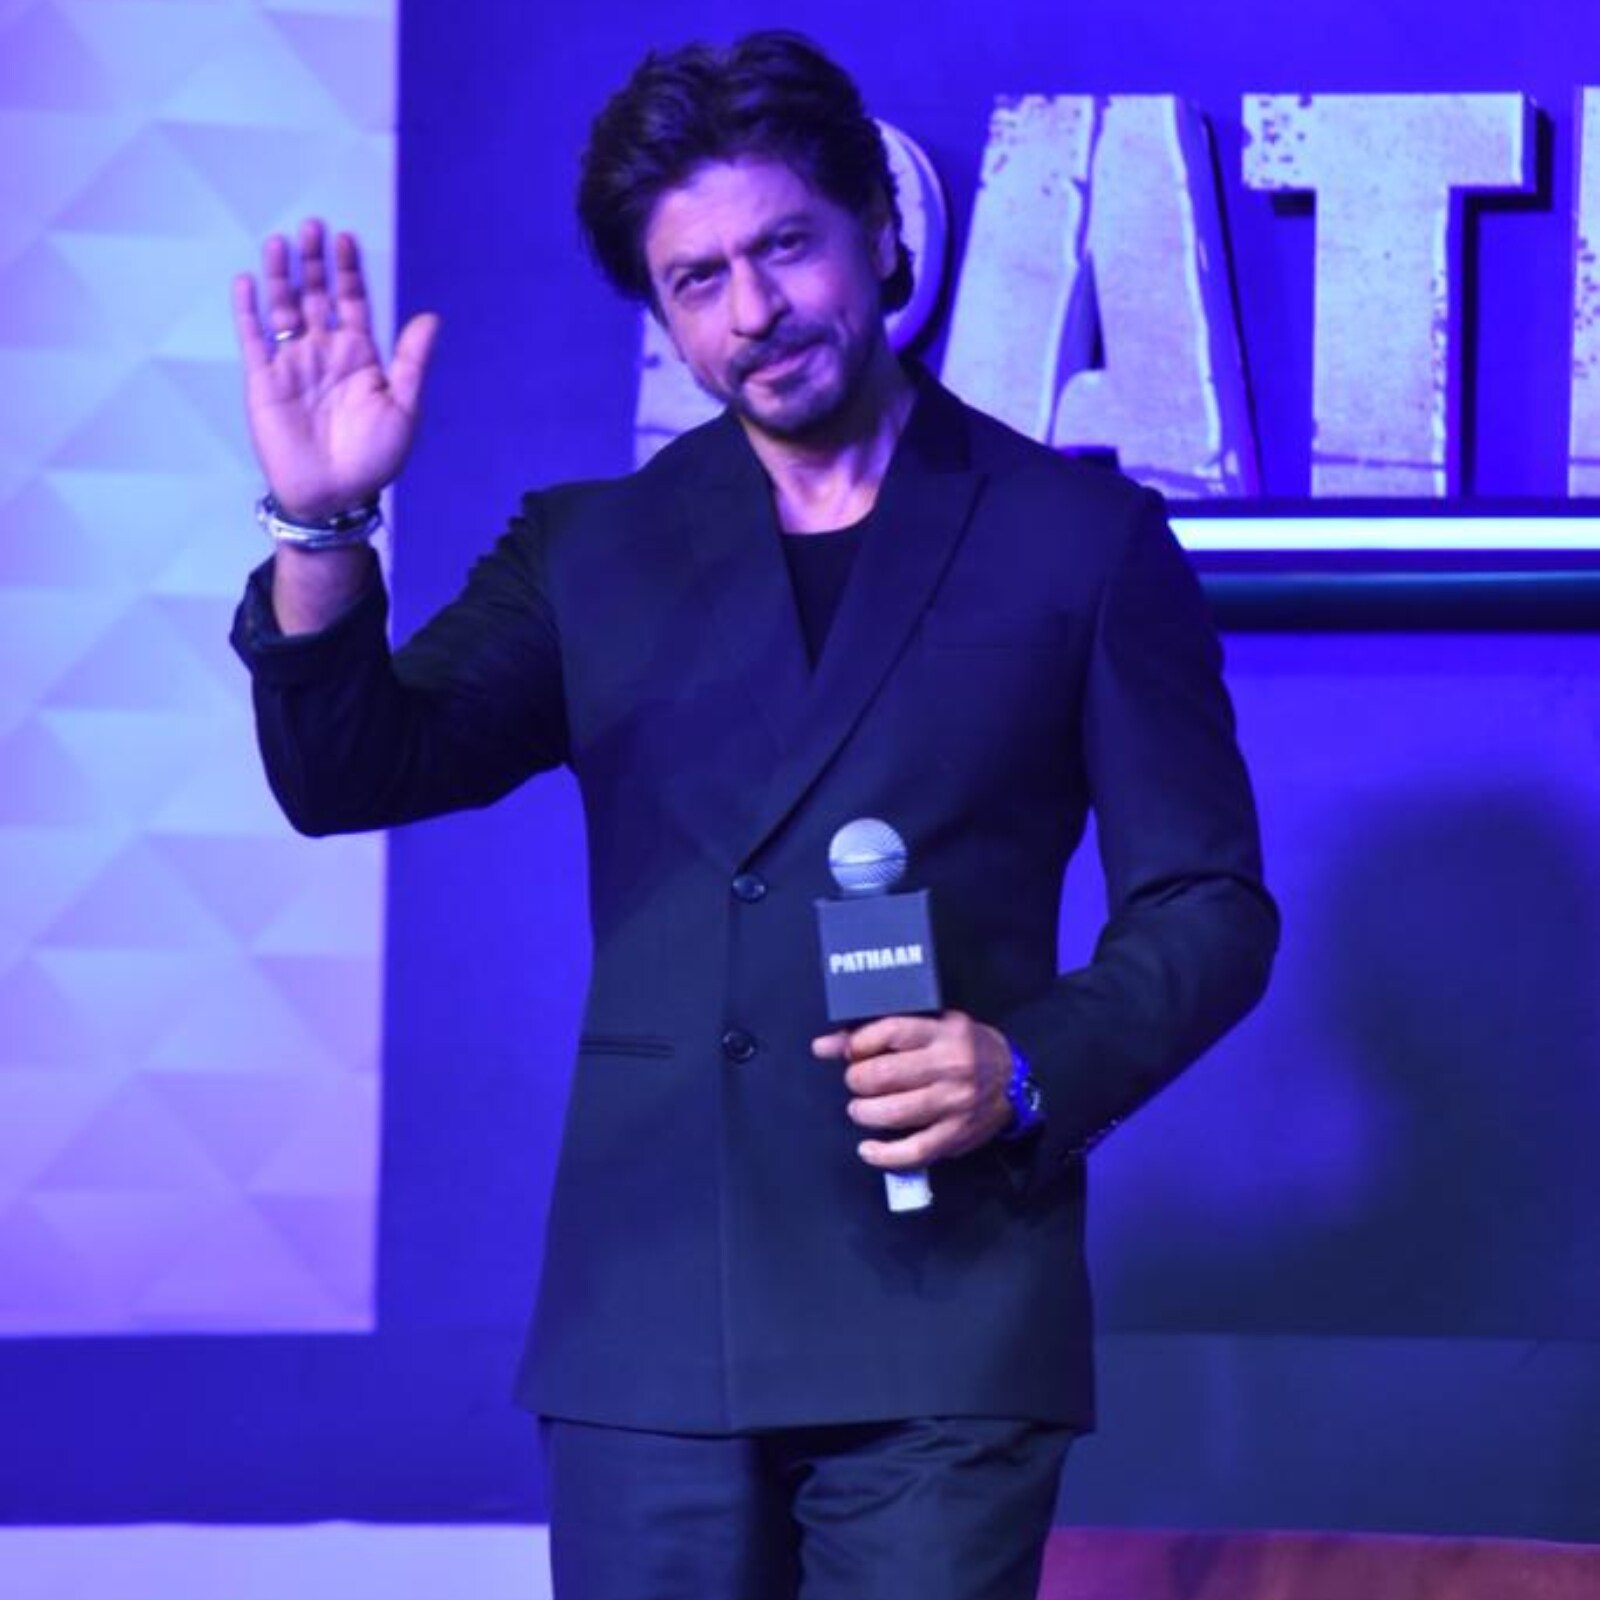 Want To Smell As Good As Shah Rukh Khan? Shop His Signature Scents - HELLO!  India